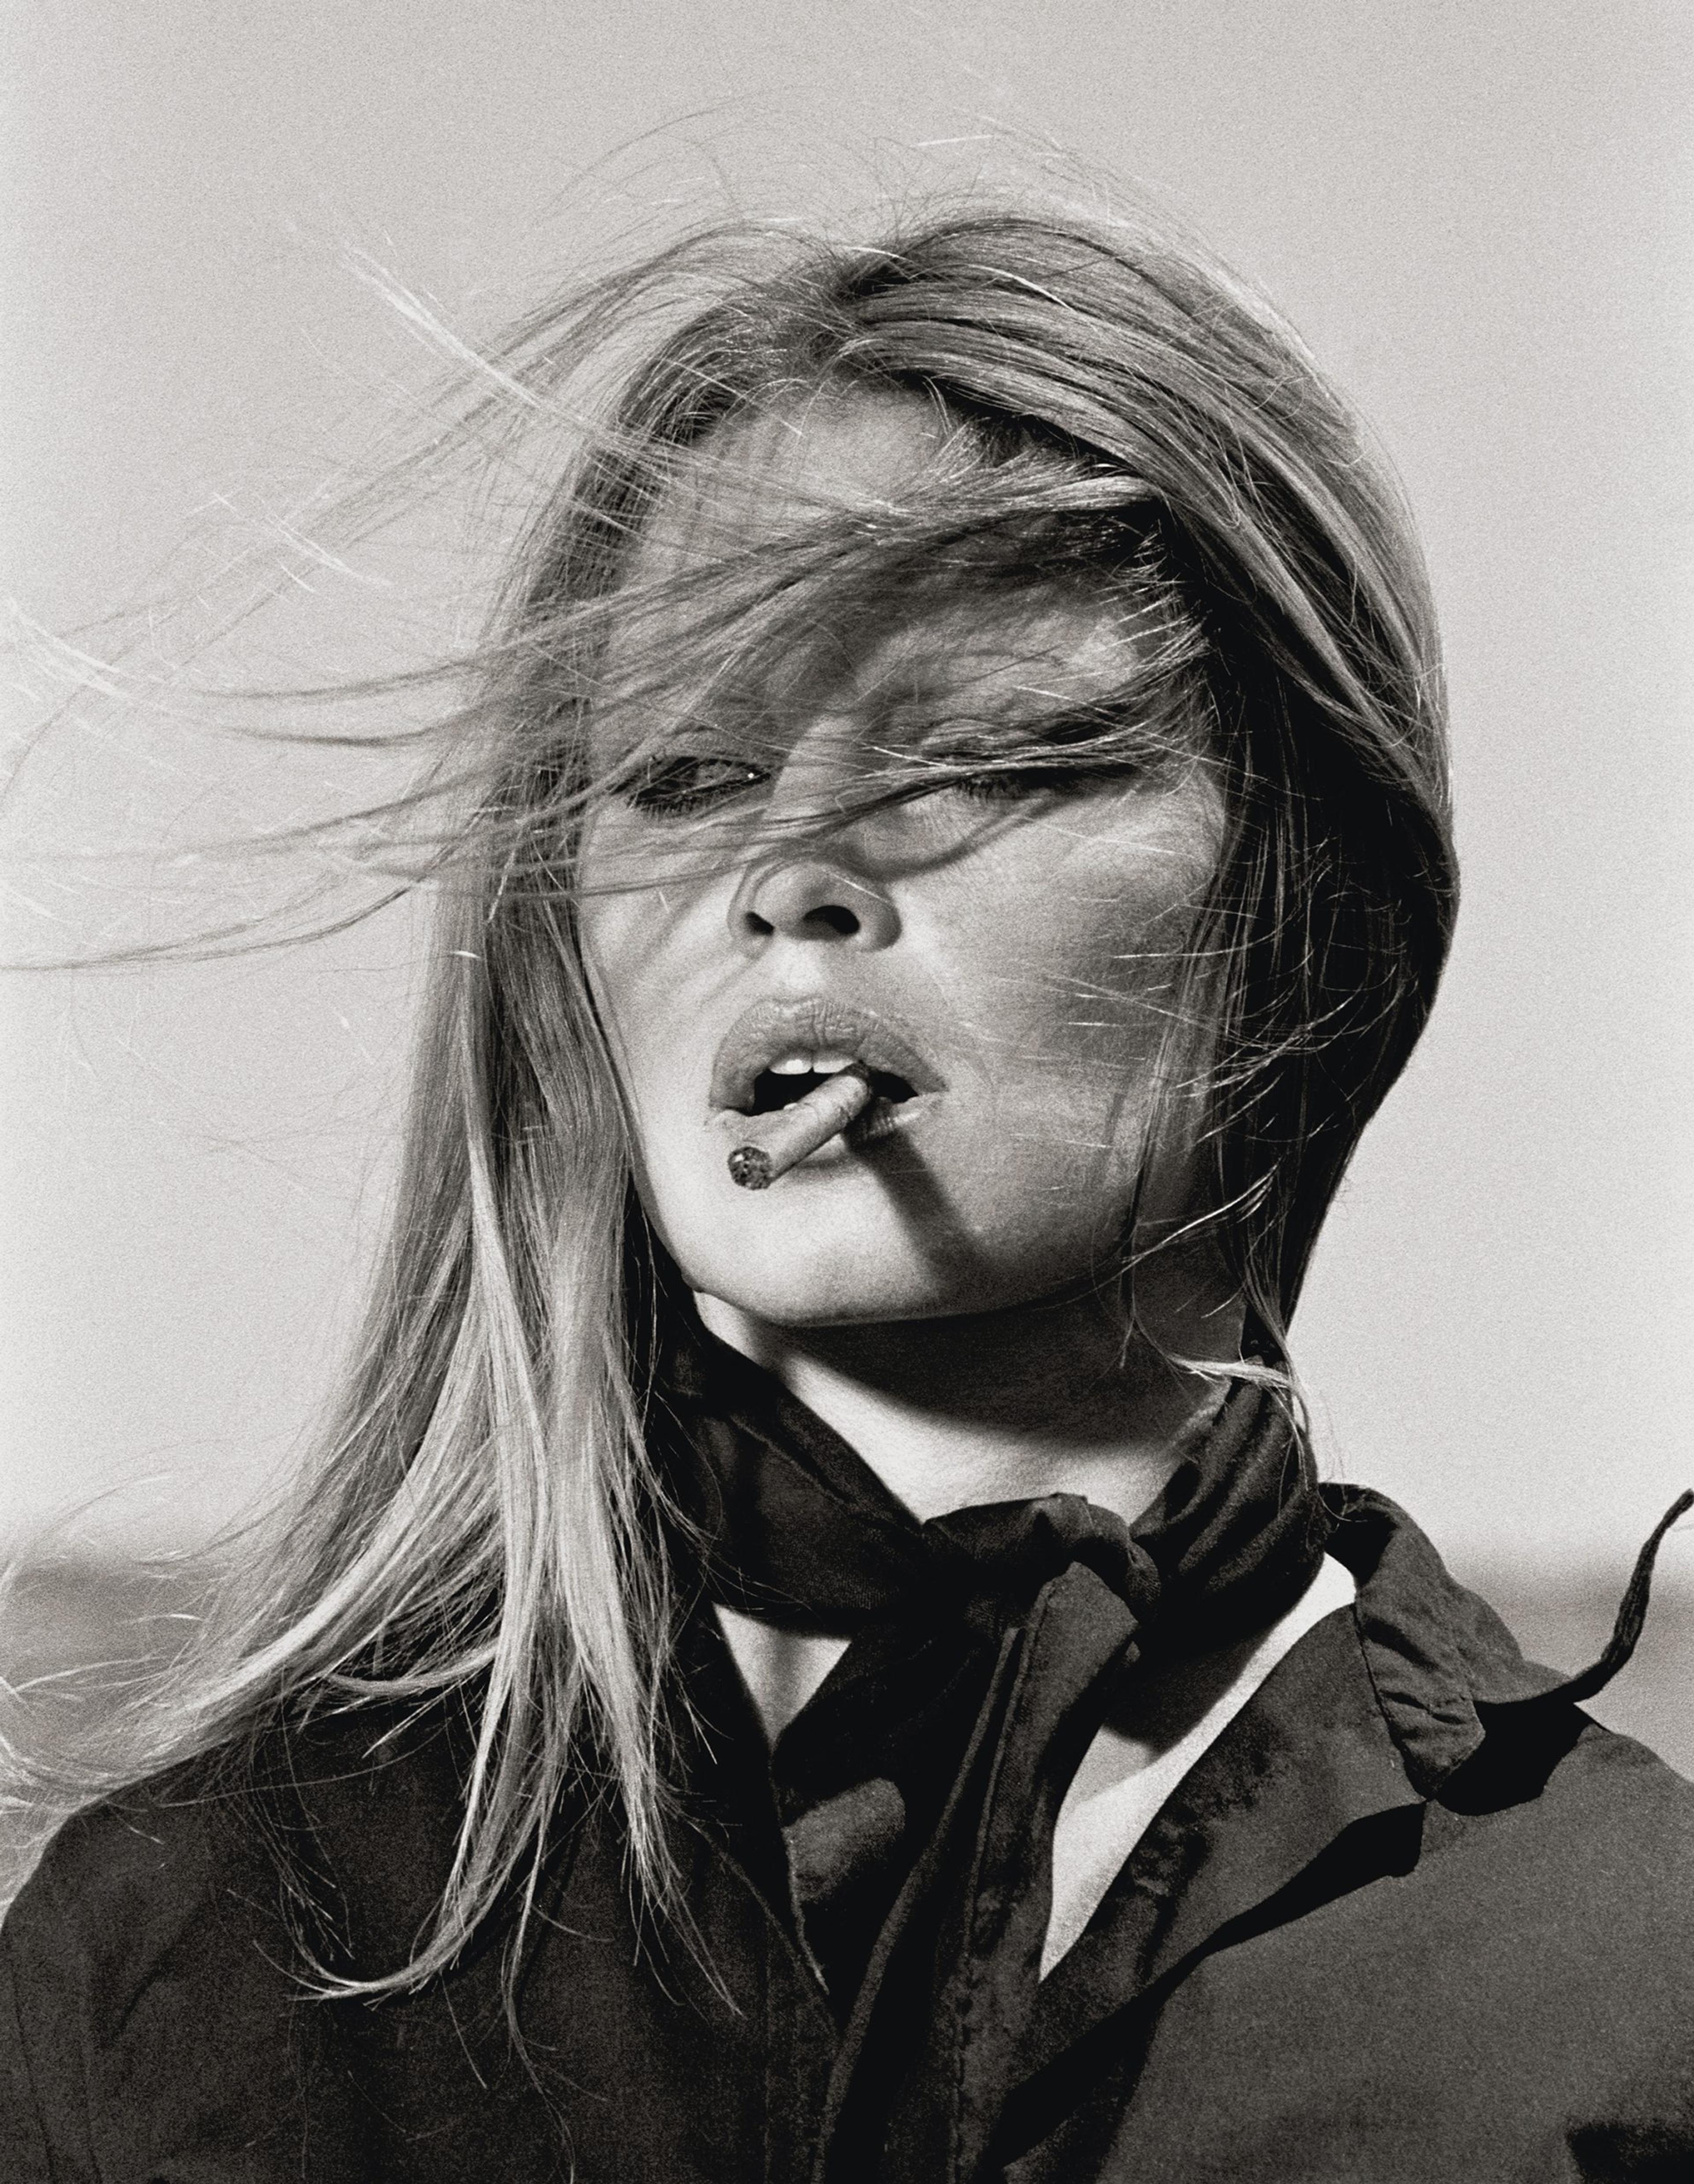 A black-and-white photograph of Brigitte Bardot with windblown hair, wearing dark clothing and holding a cigarette in her mouth